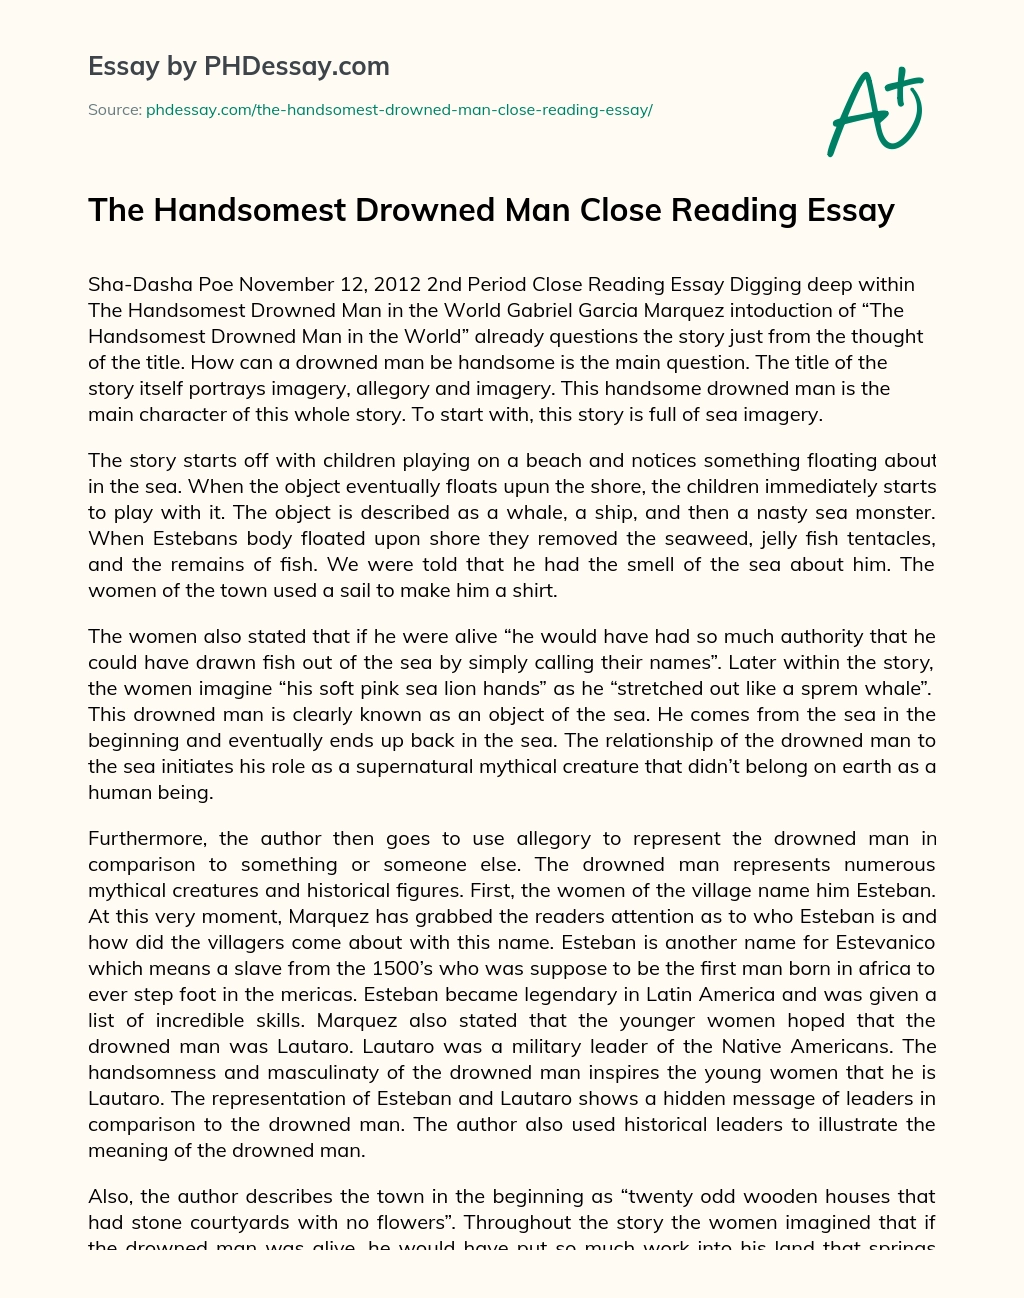 The Handsomest Drowned Man Close Reading Essay essay